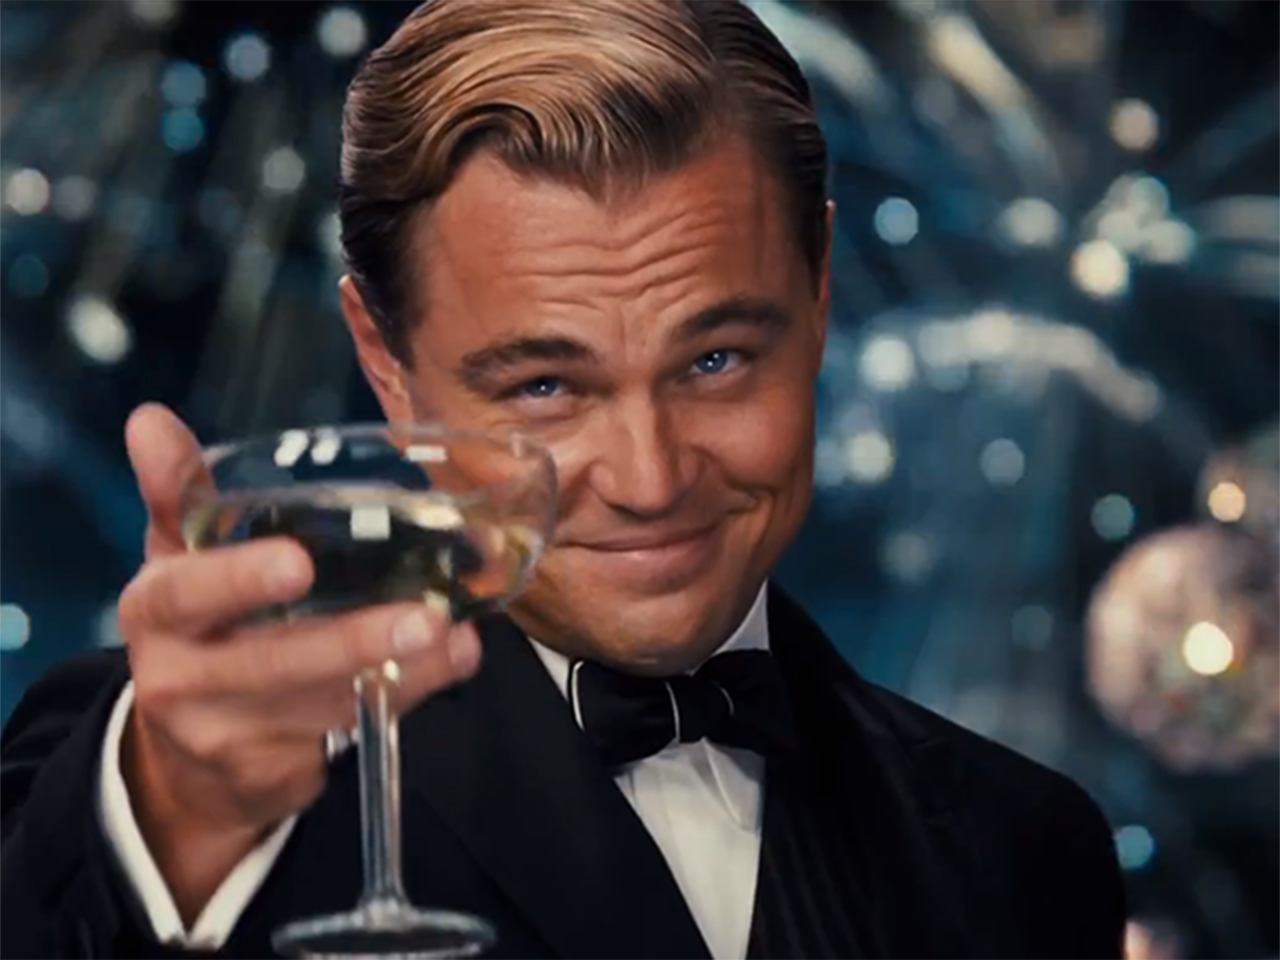 Cheers! Let's toast Leonardo DiCaprio again and again and again